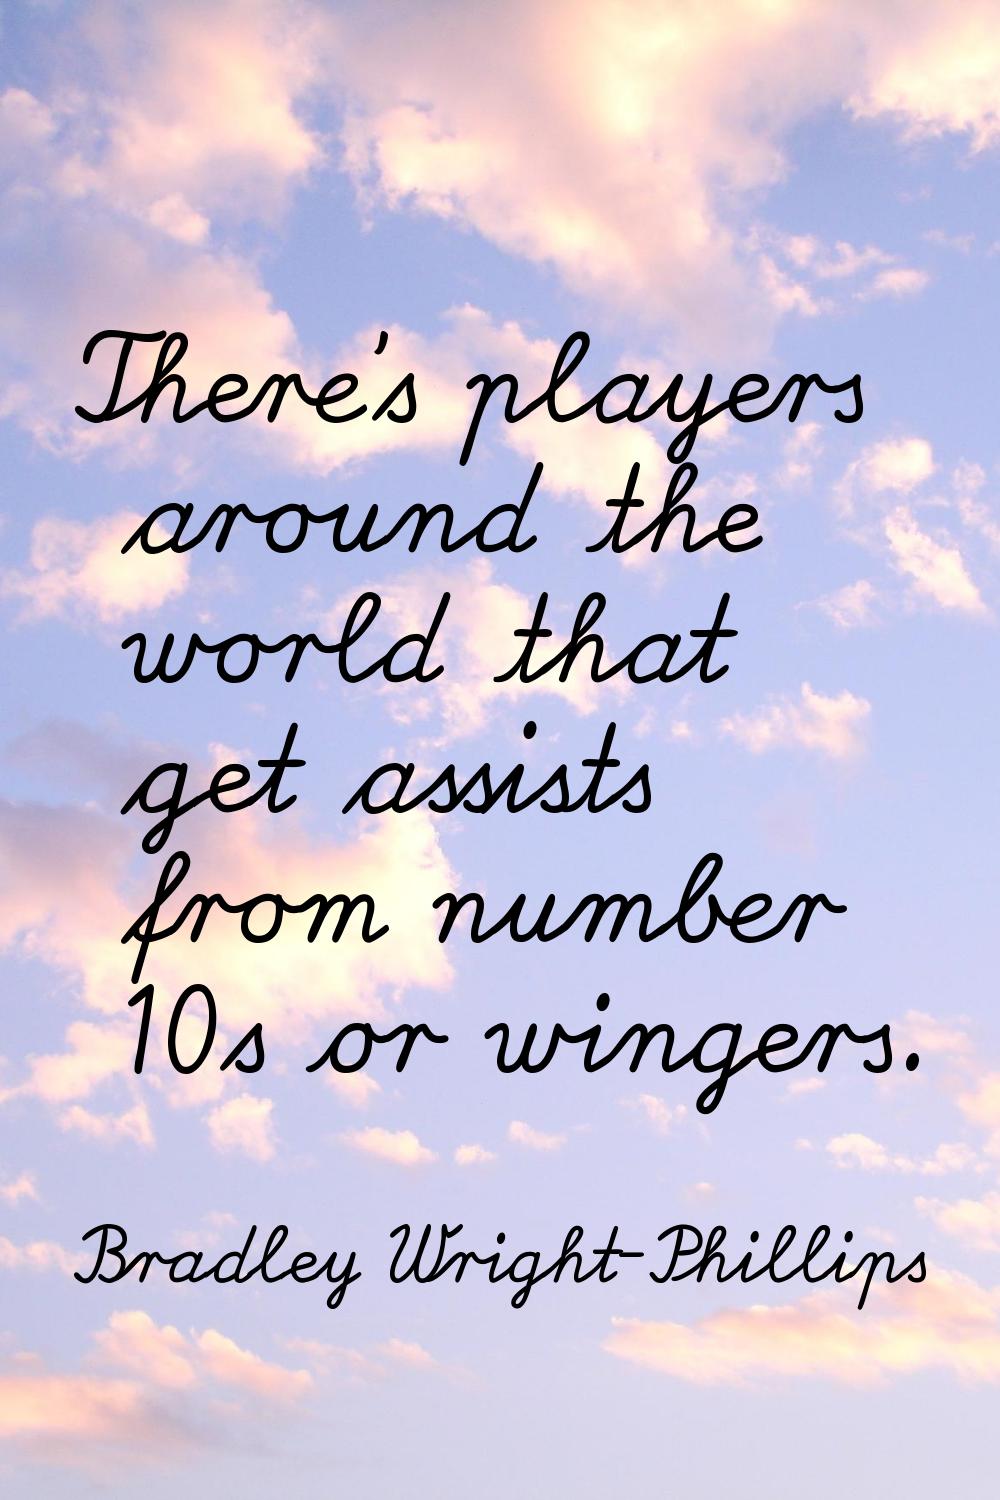 There's players around the world that get assists from number 10s or wingers.